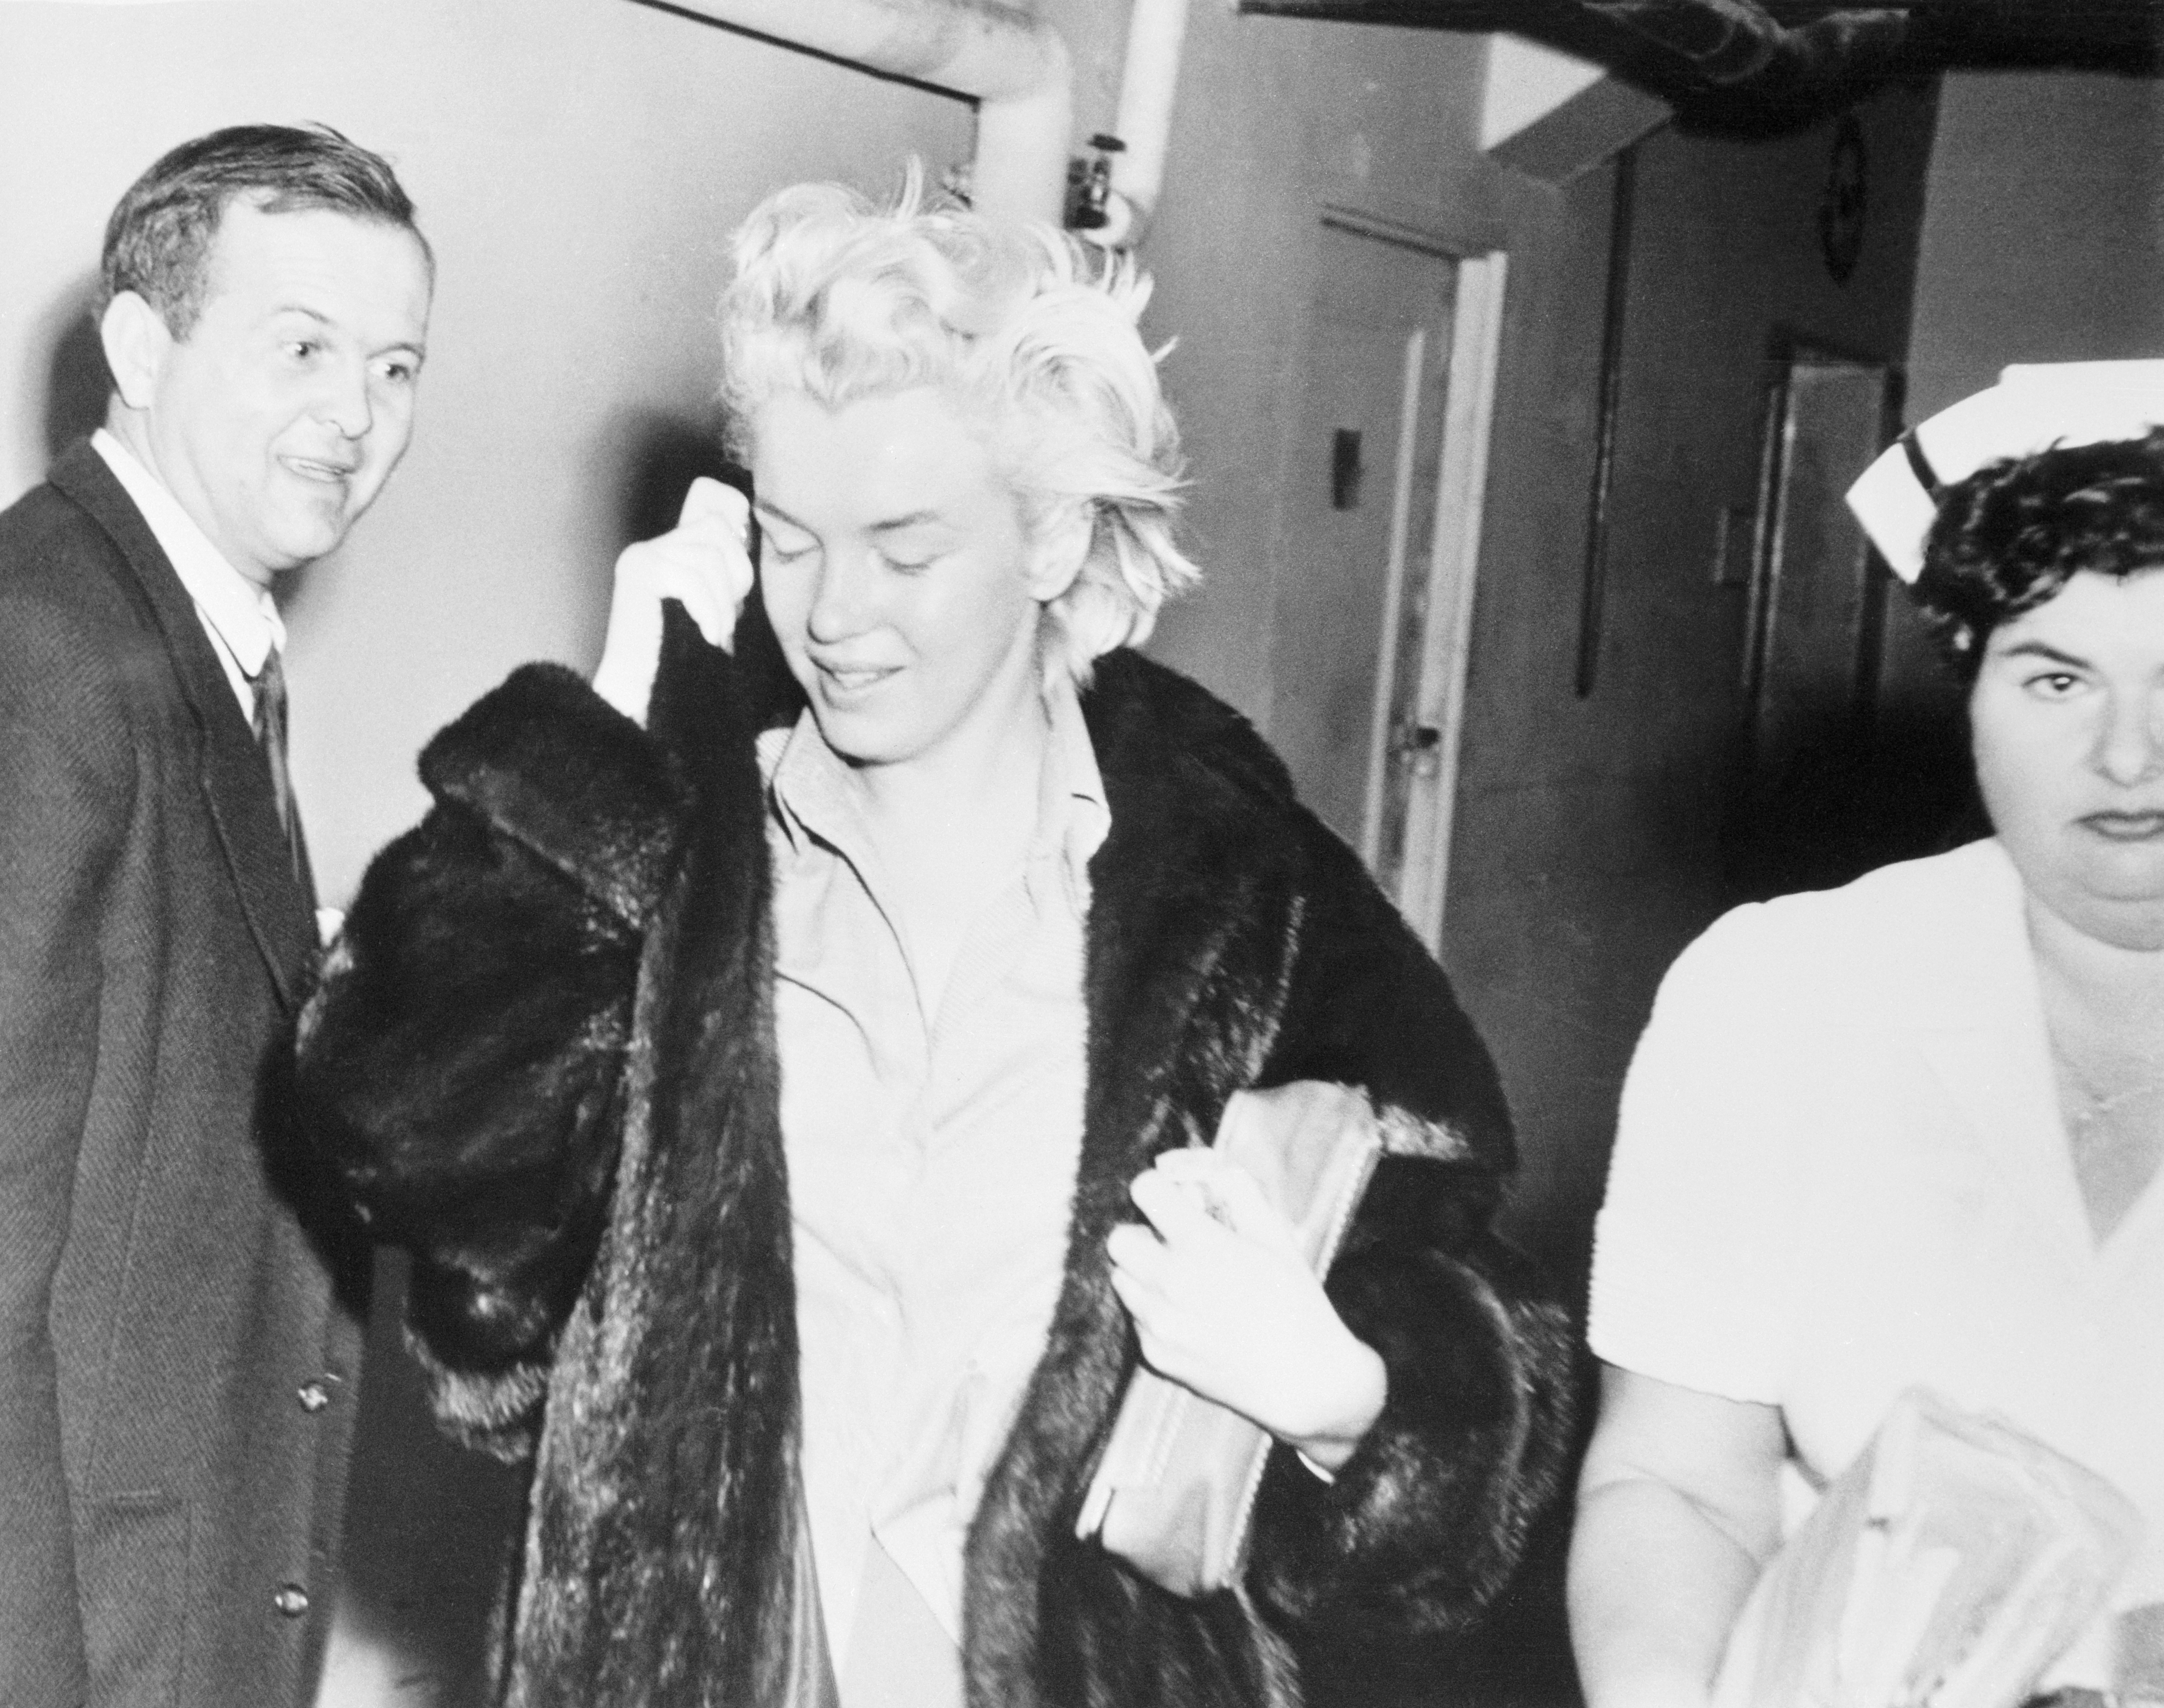 Marilyn Monroe pictured leaving a hospital in 1954. | Source: Getty Images